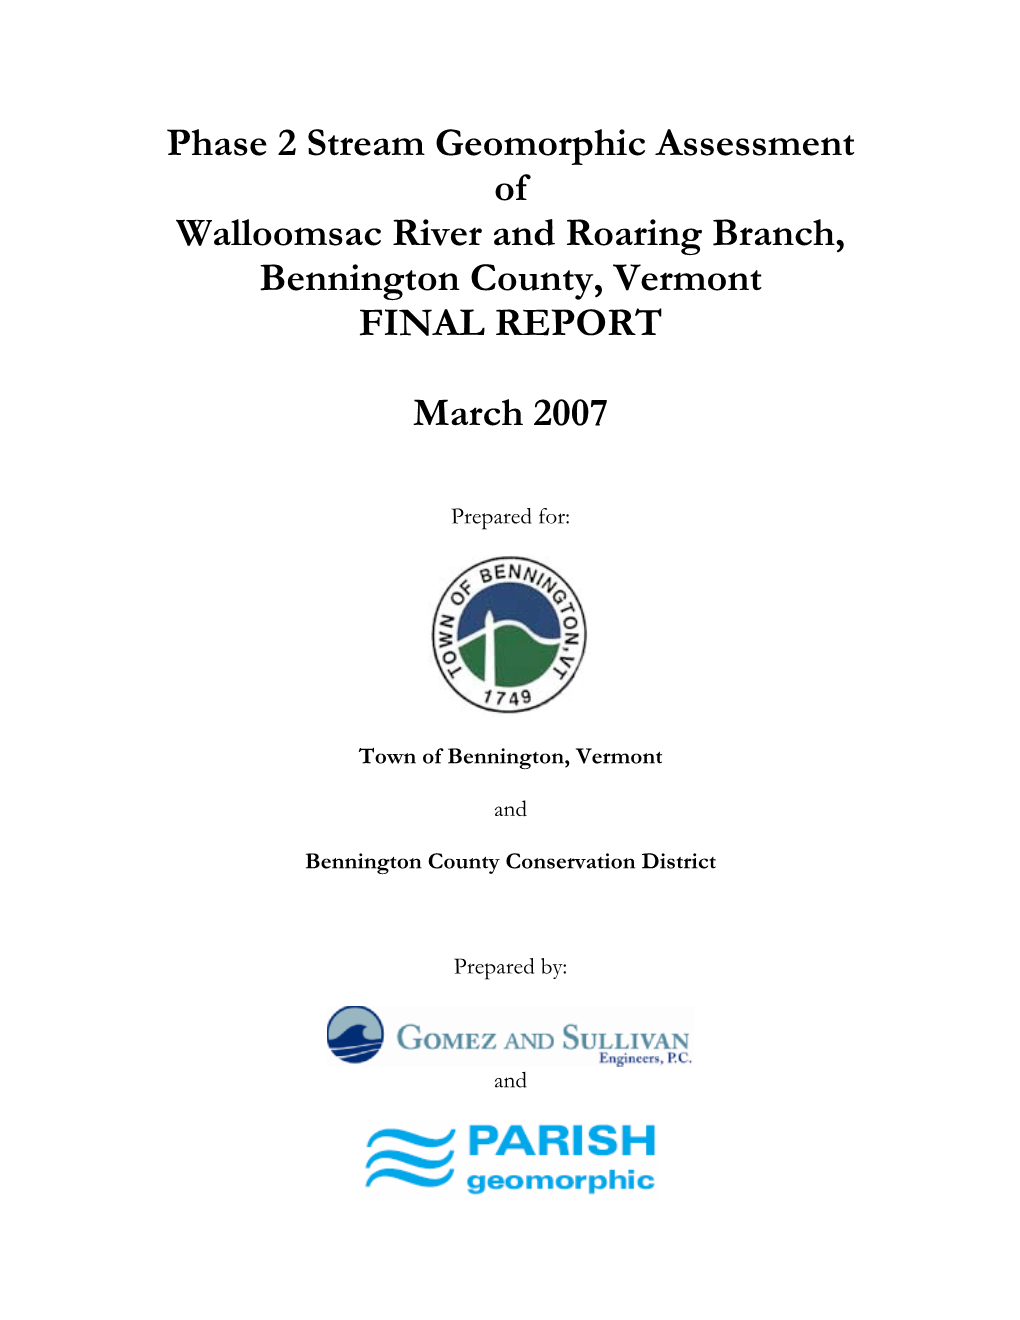 Phase 2 Stream Geomorphic Assessment of Walloomsac River and Roaring Branch, Bennington County, Vermont FINAL REPORT